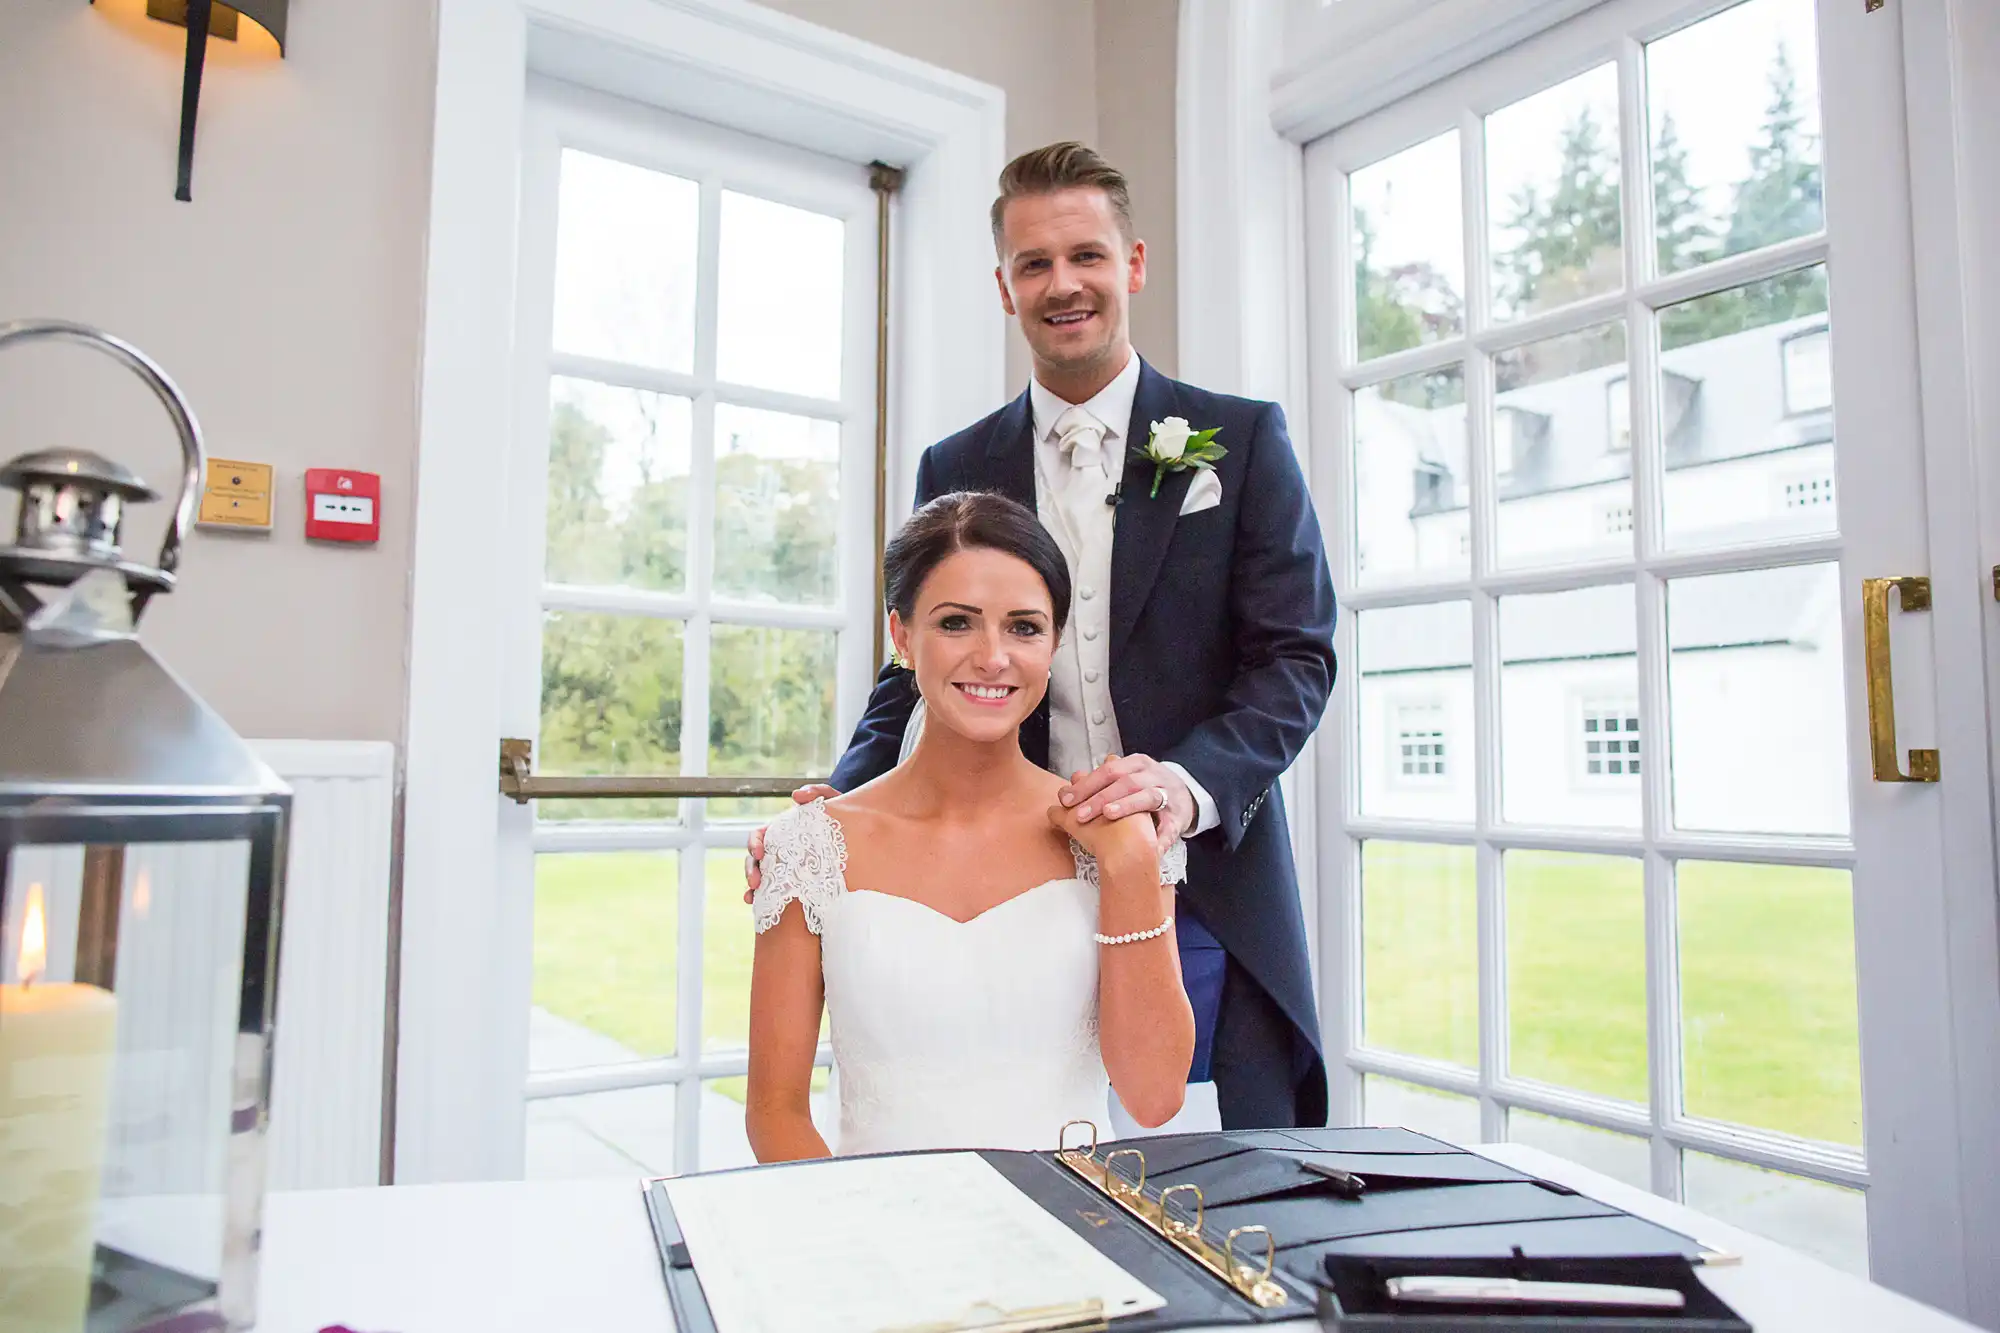 A bride and groom smiling at the camera, standing behind a signing table with documents in a bright room with windows.